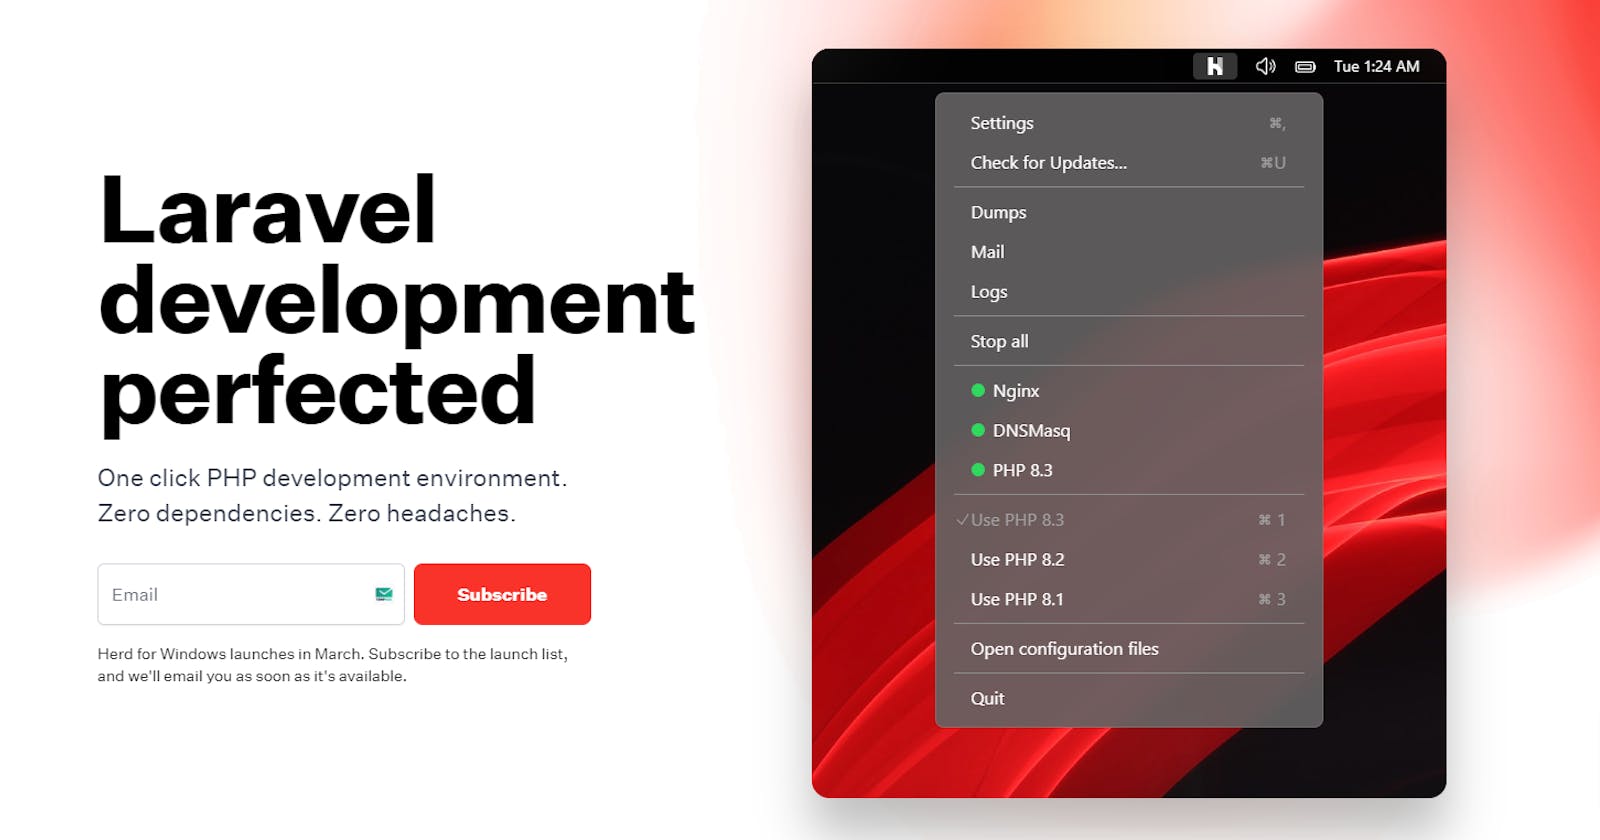 Laravel Herd for Windows launches in March '24